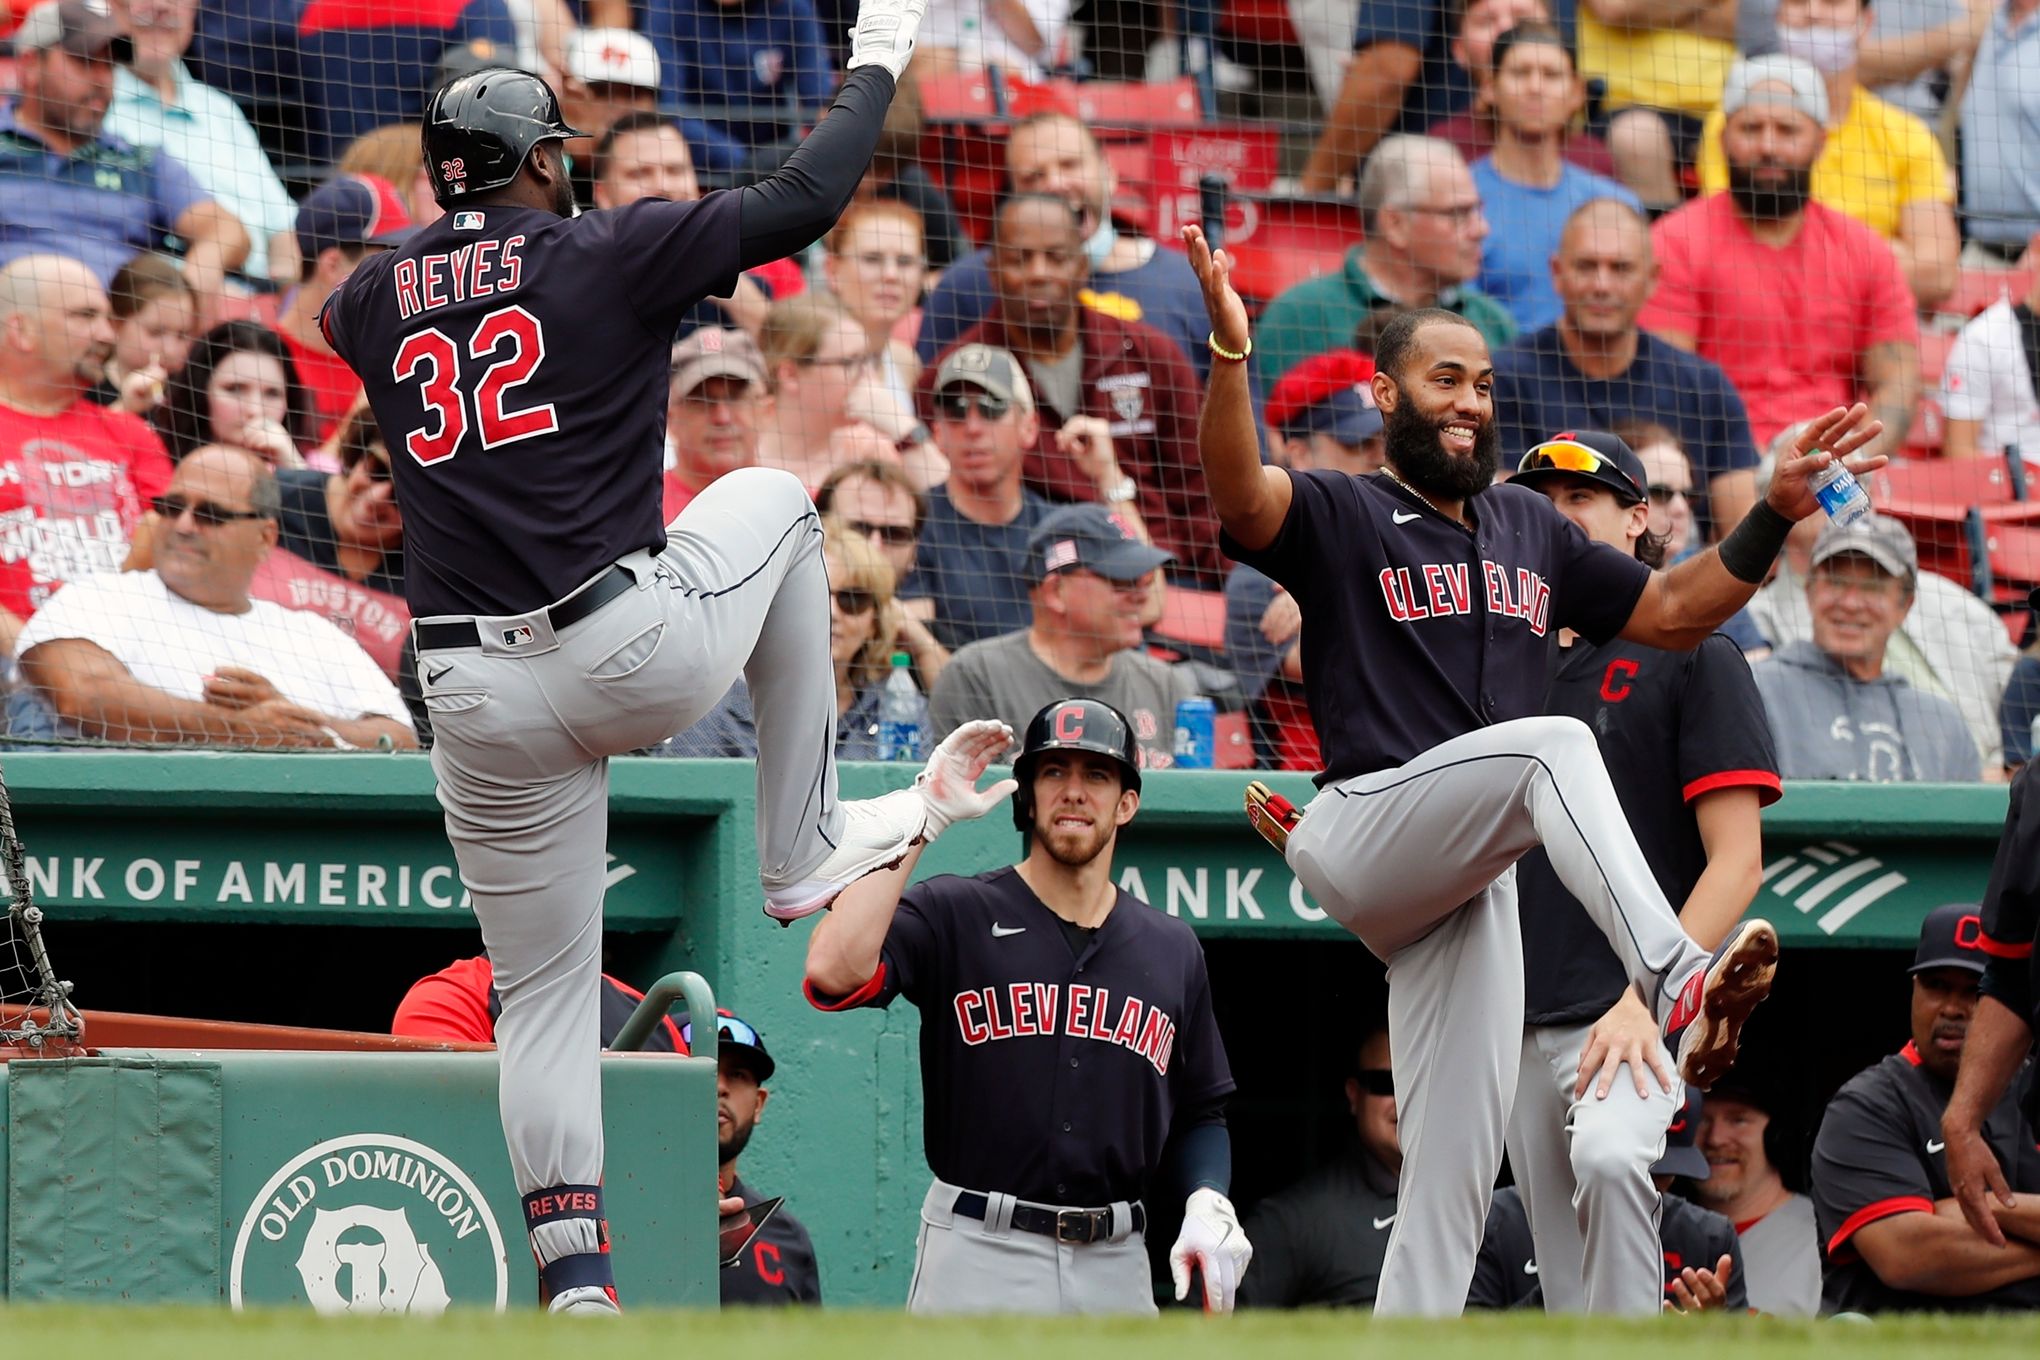 Despite scoring just 3 runs in the last 2 games, Alex Cora has no plans to  change the Red Sox lineup